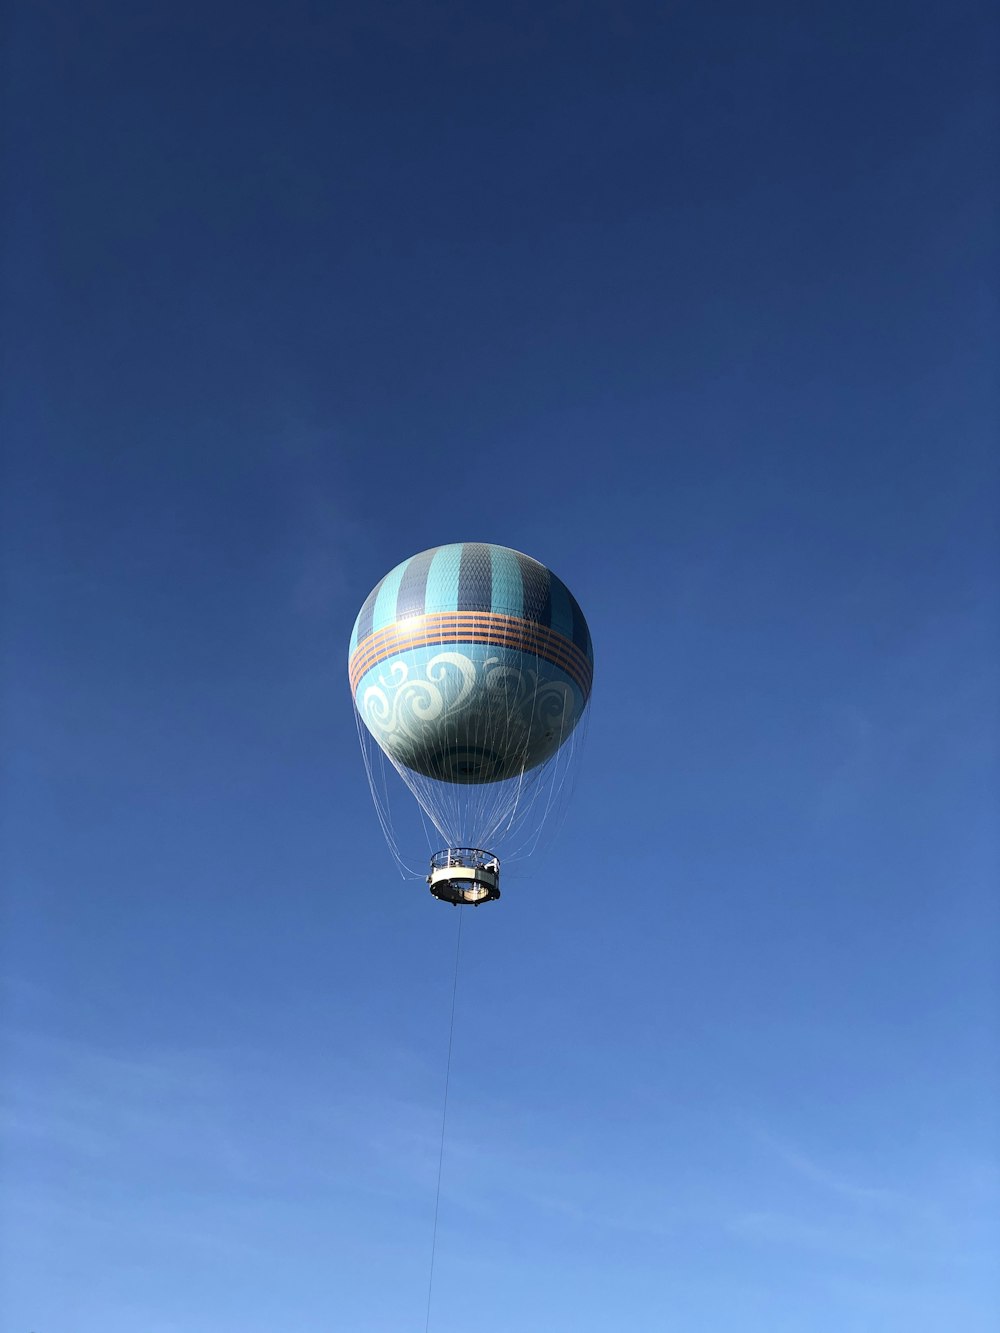 flying gray hot air balloon during daytime